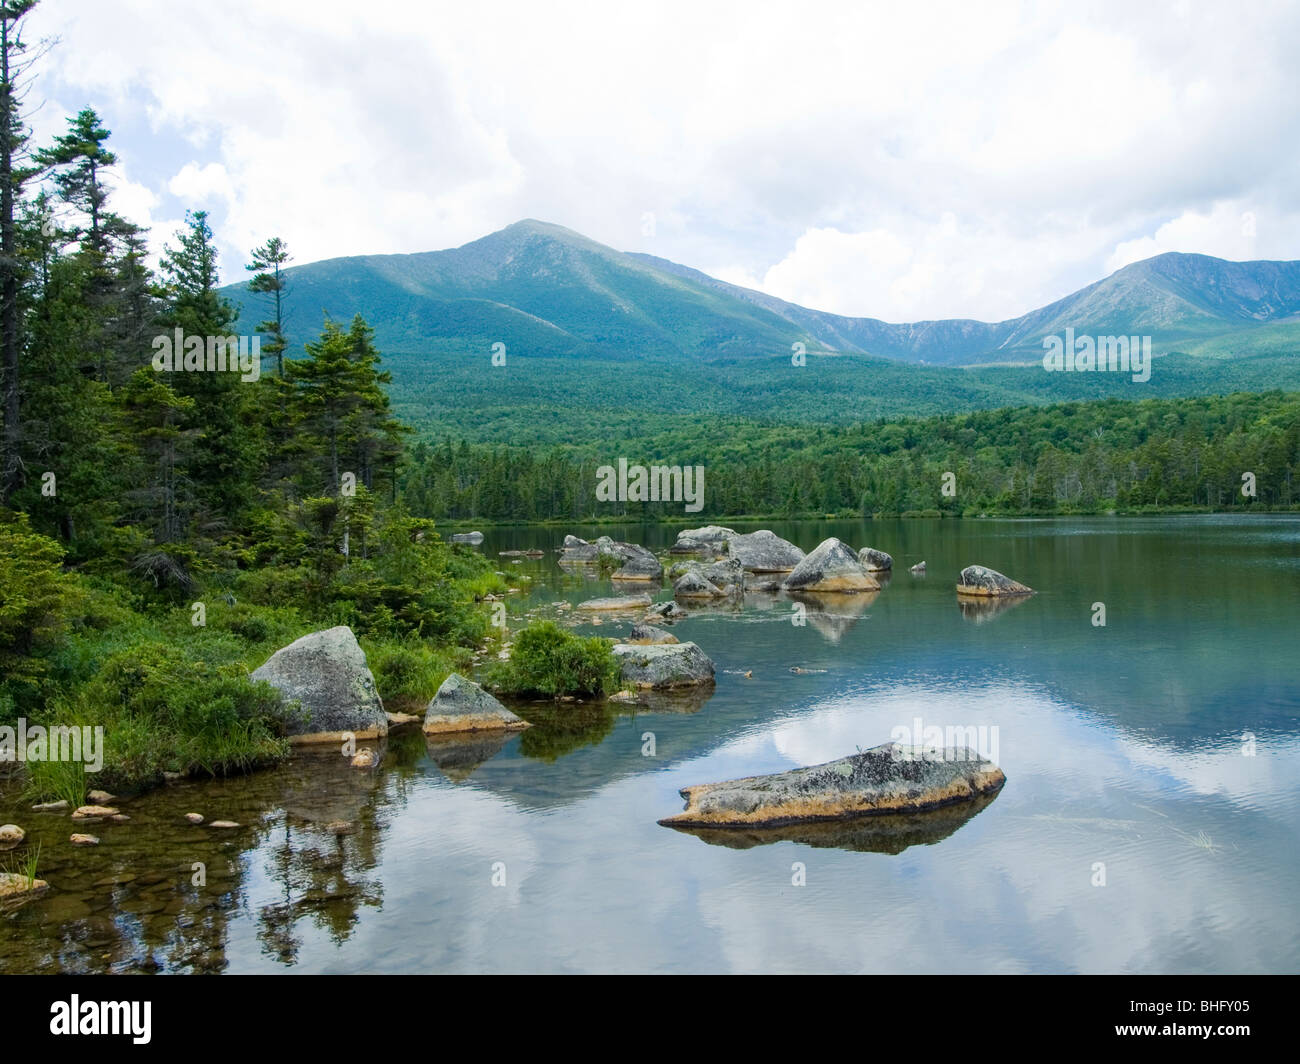 OLYMPUS DIGITAL CAMERA View of Mt. Katahdin from a lake in Baxter State Park, Maine Stock Photo